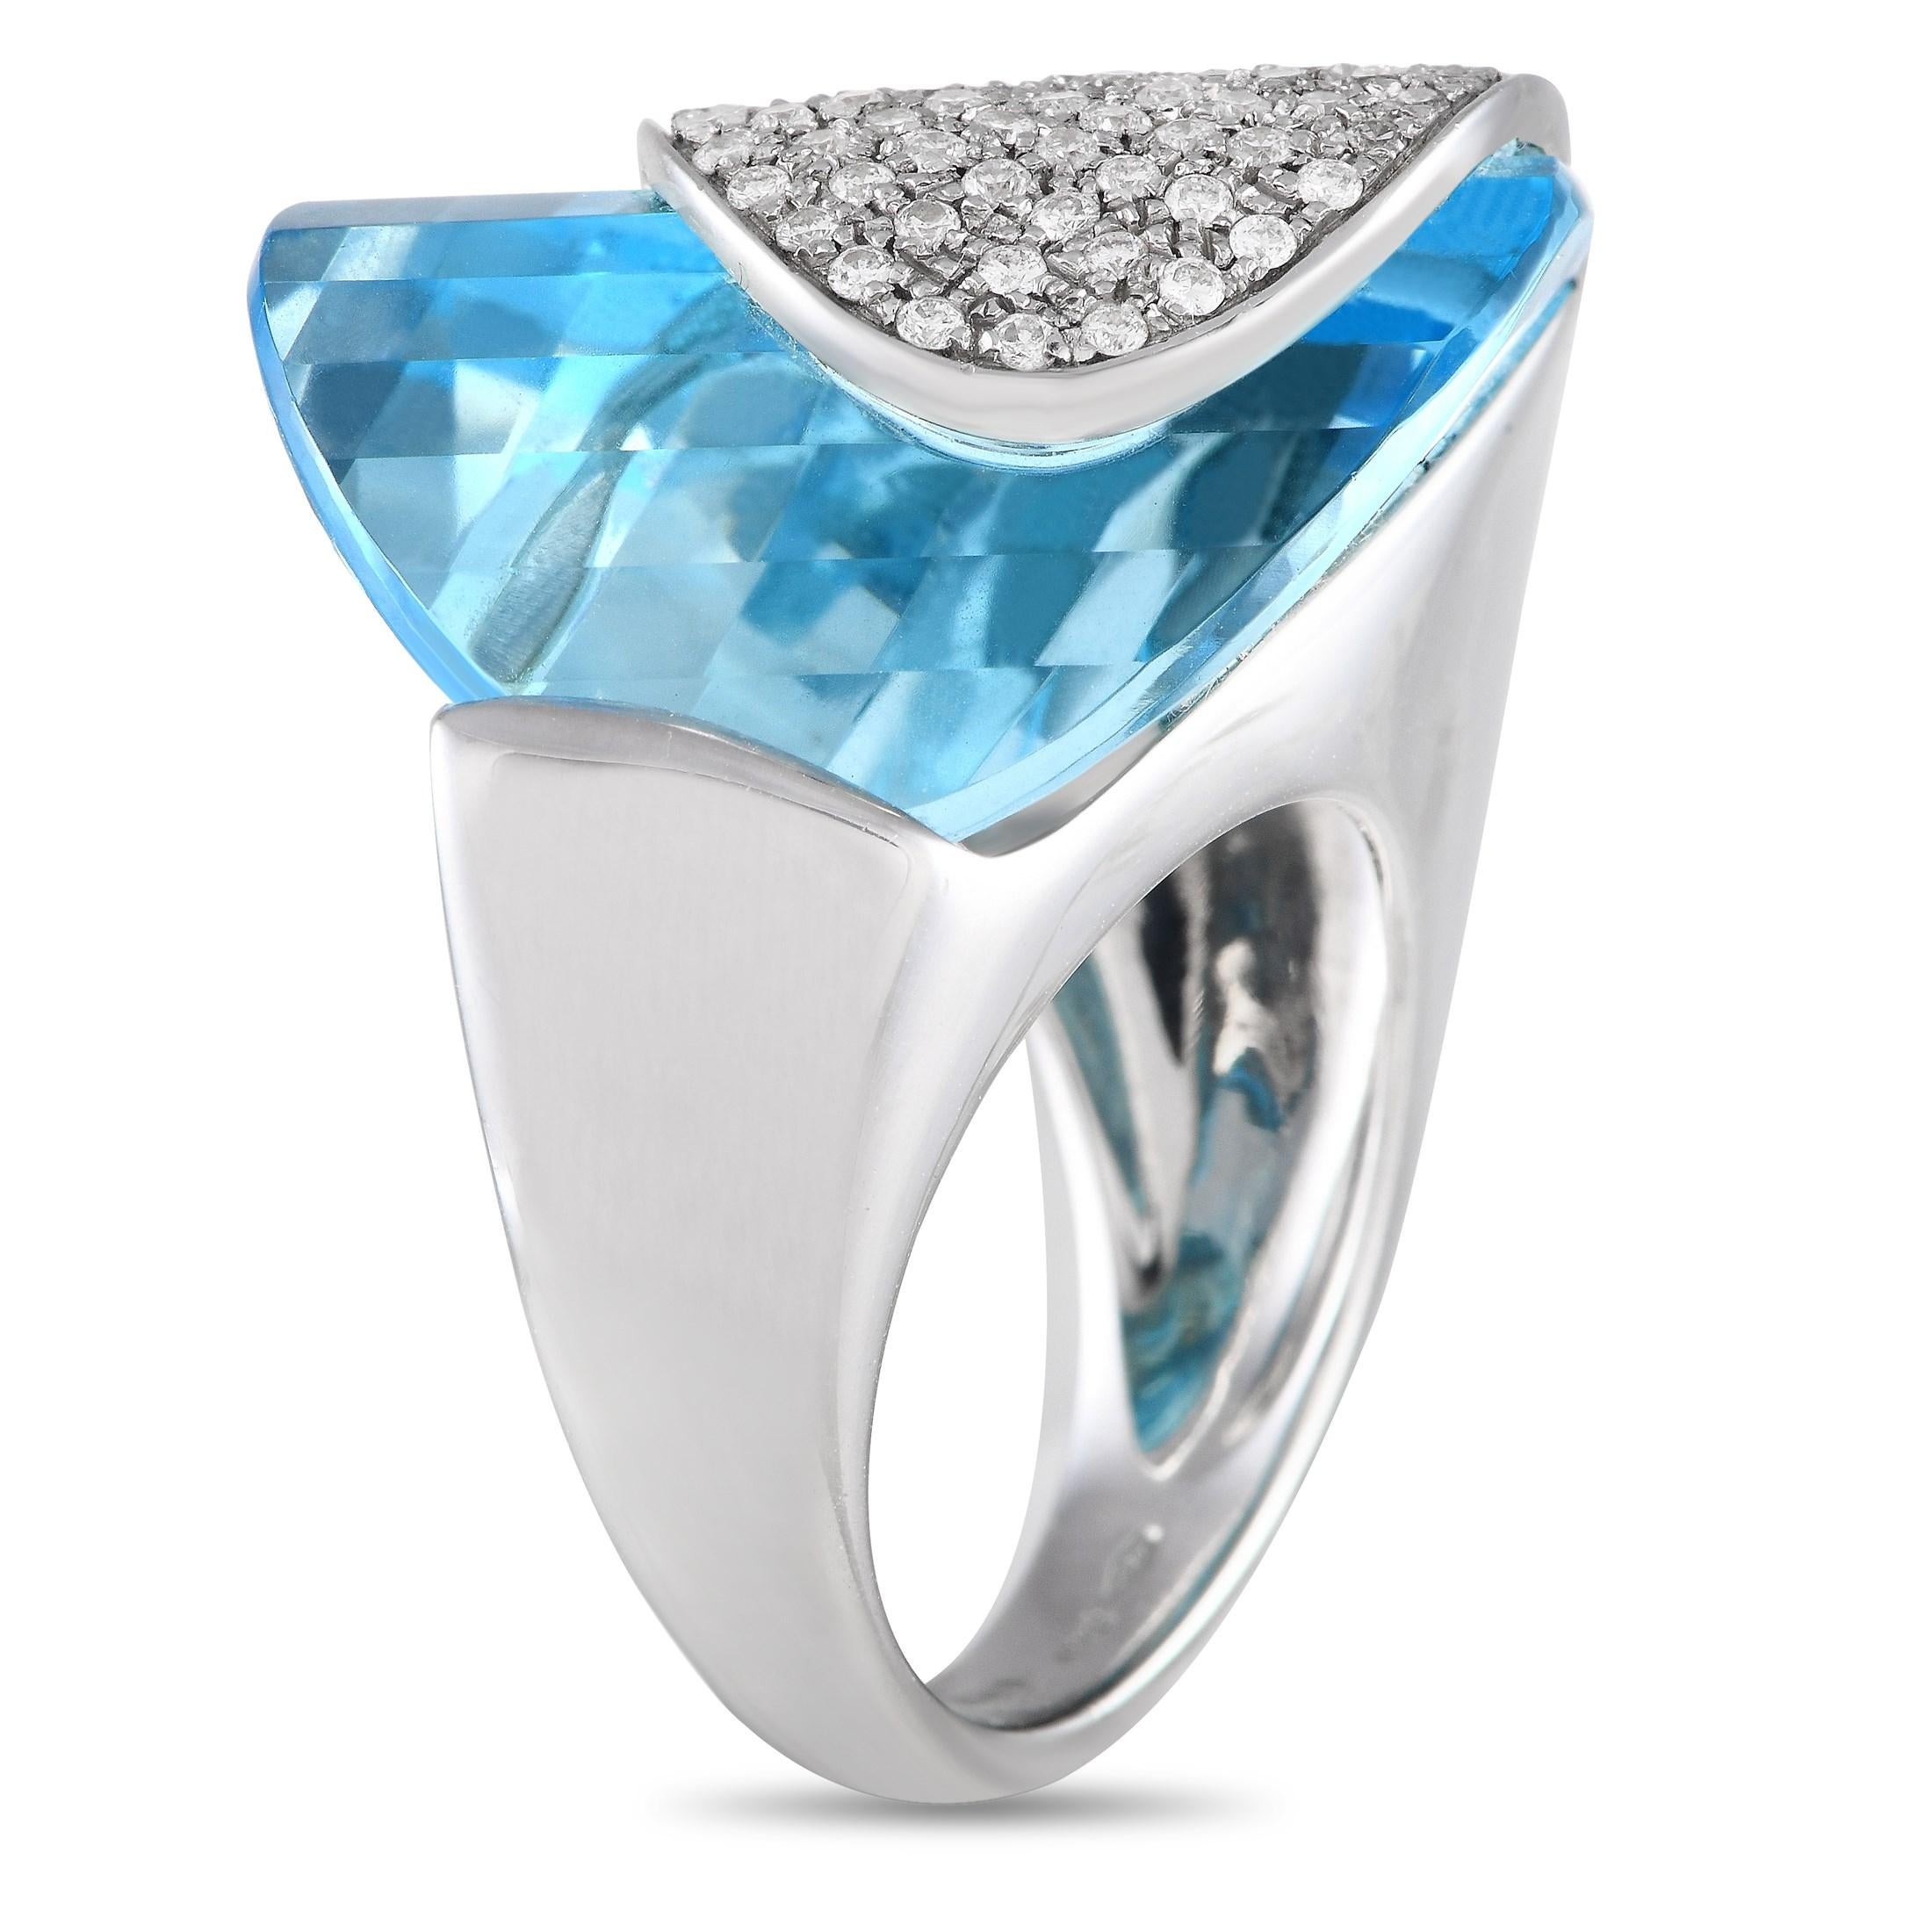 Reflecting Italian creativity, this cocktail ring from Superoro promises superb finger presence. It features a wide, domed band in polished 18K white gold. The top half of the band is embraced by a dazzling light blue topaz in a freeform faceted cut